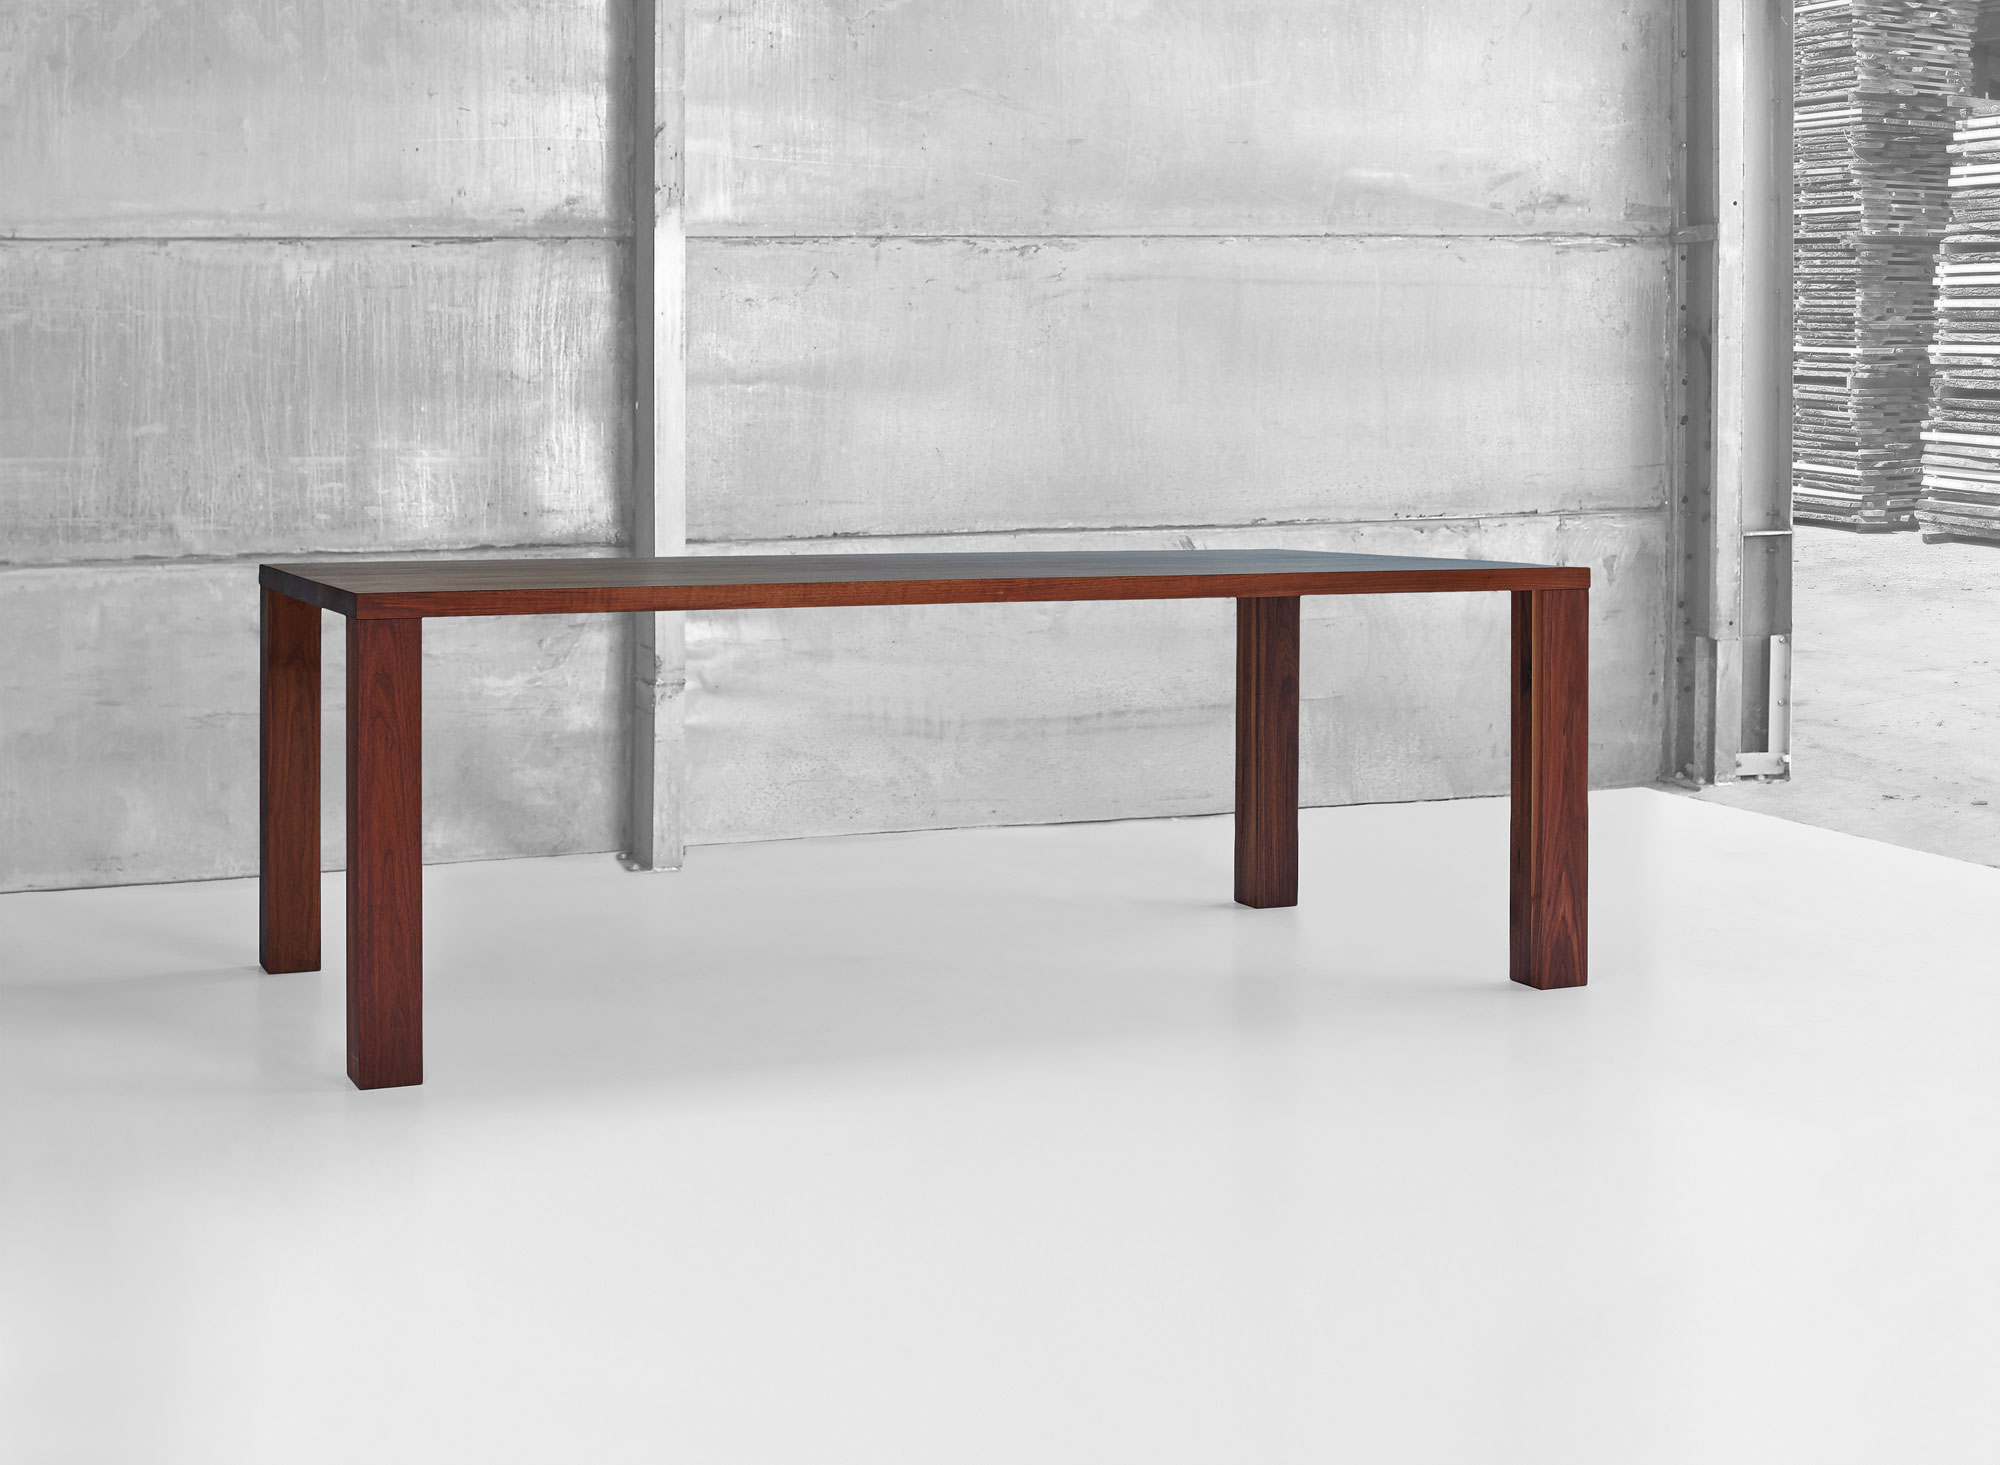 Frameless Solid Wood Table IUSTUS 0990pk custom made in solid wood by vitamin design